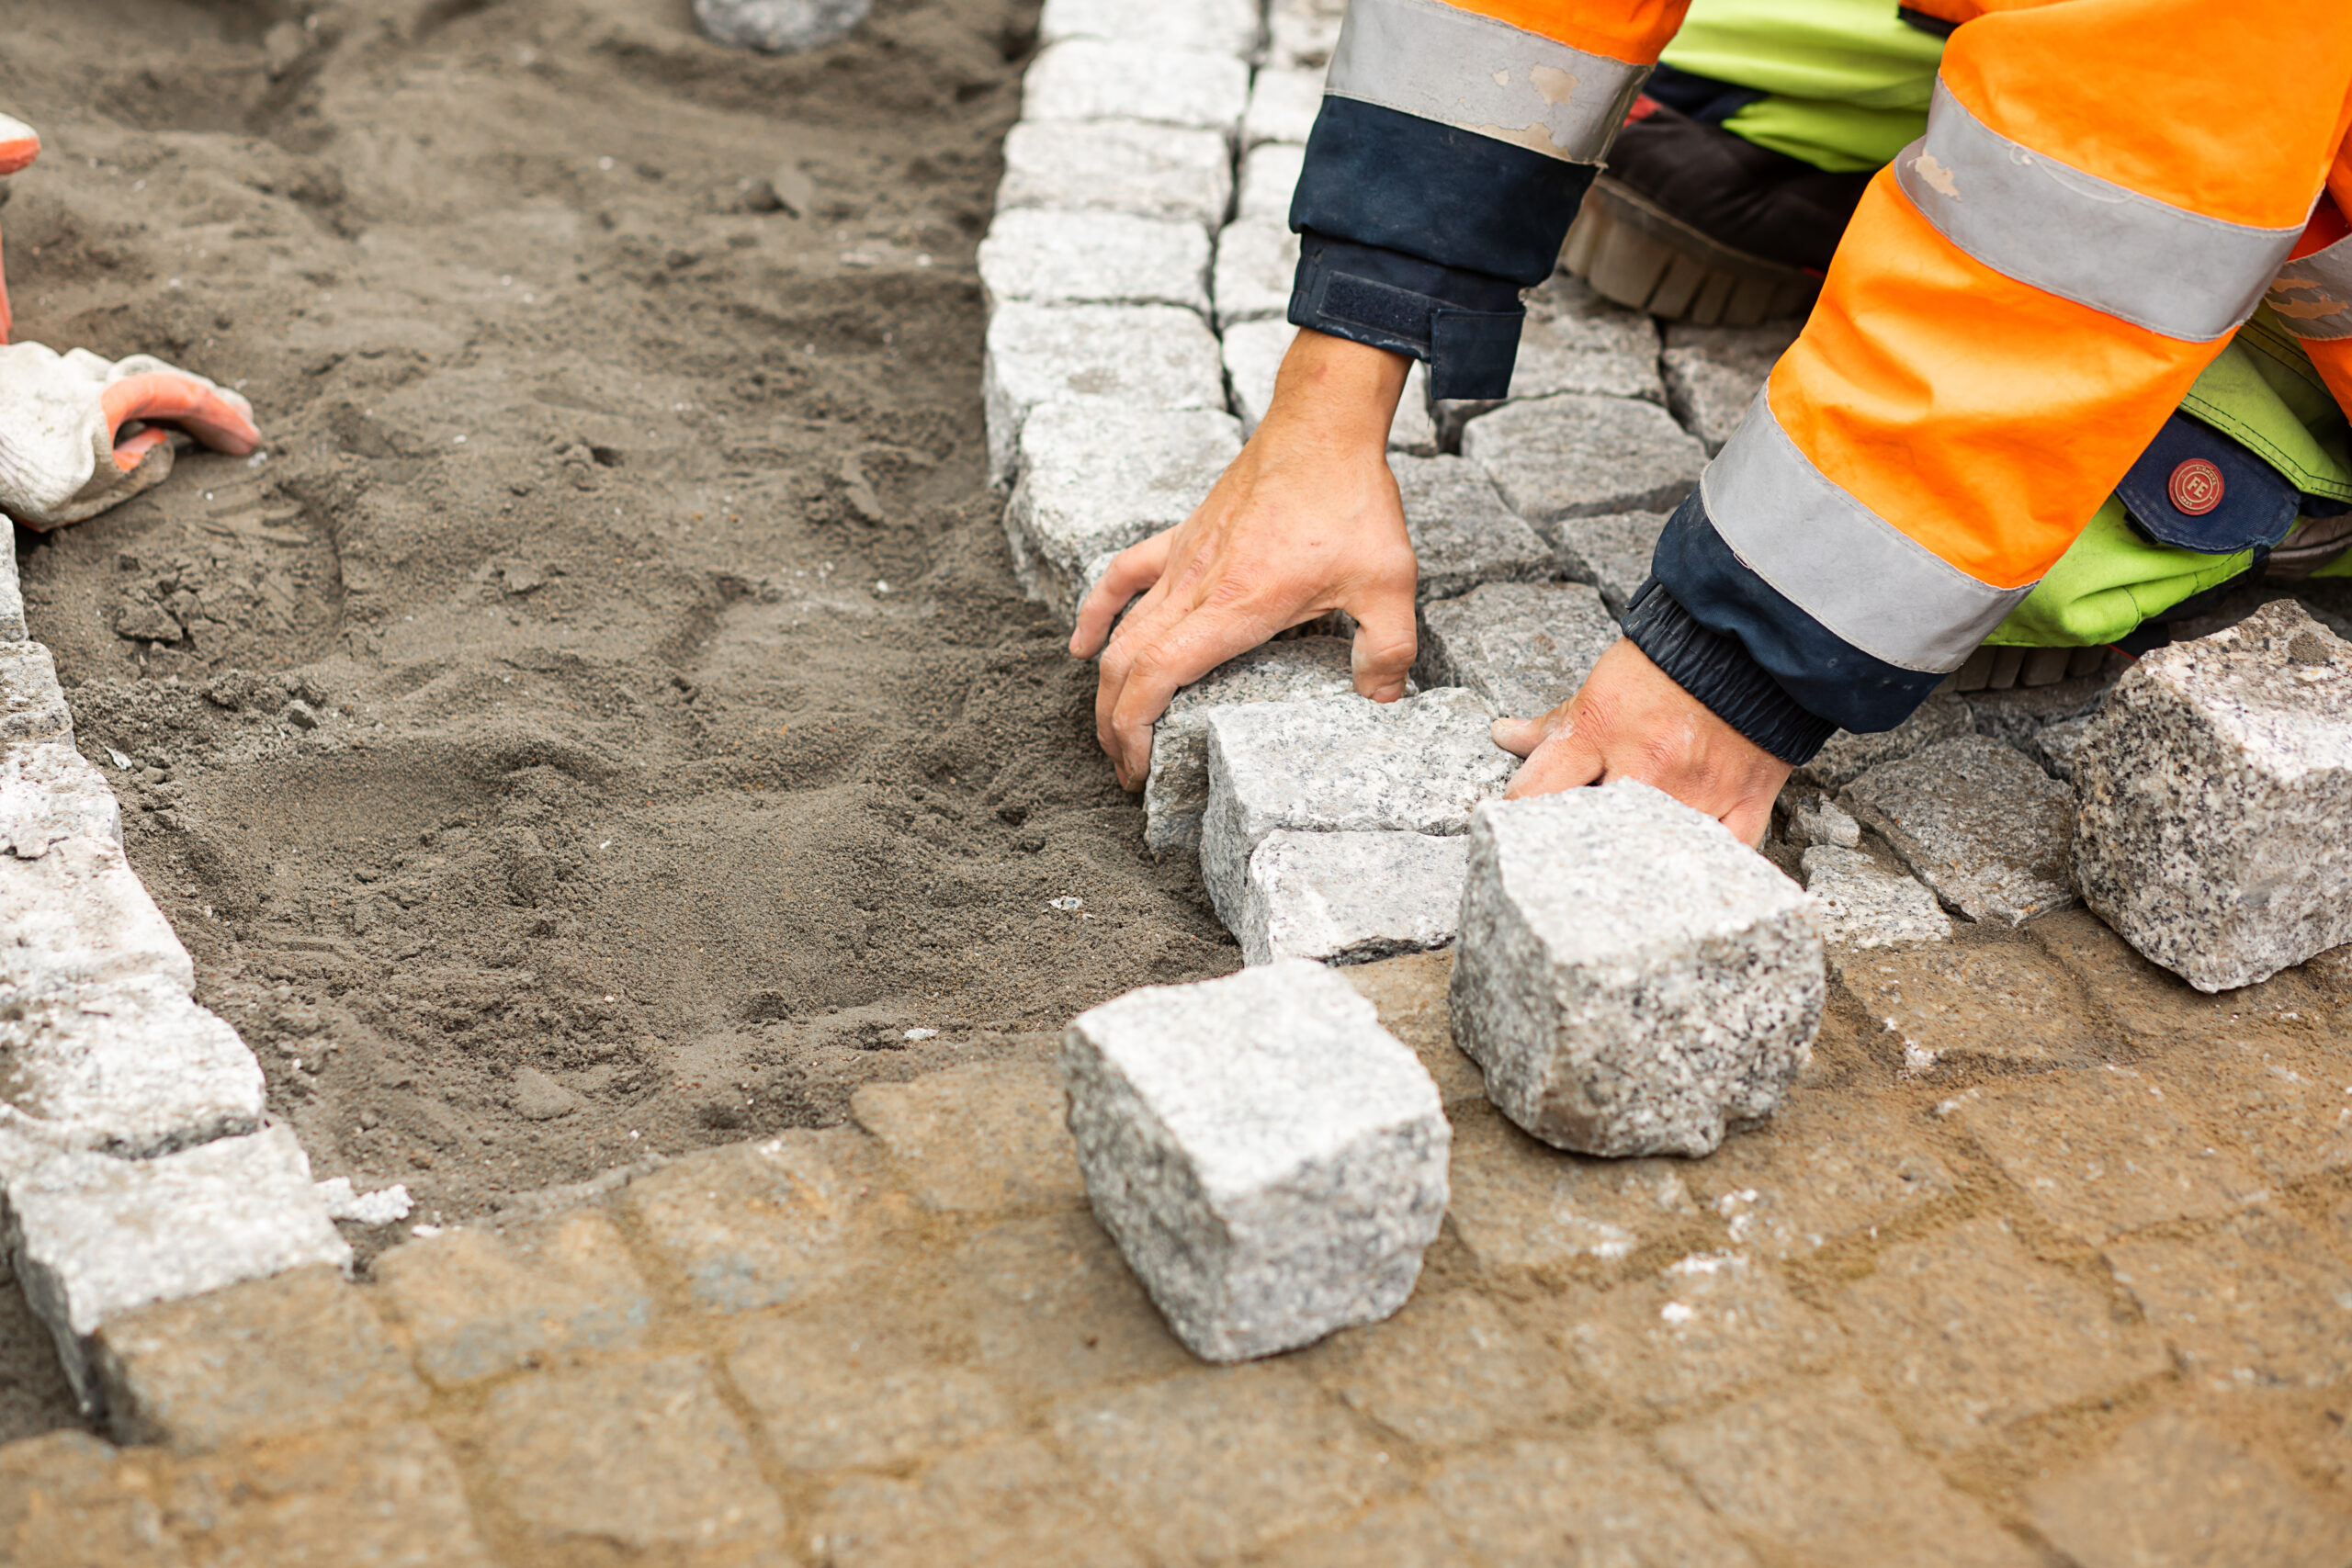 Maintenance work on paving with interlocking paving stones. Unrecognizable persons with building materials in hand, Concrete products, building industry for road or sidewalk construction.